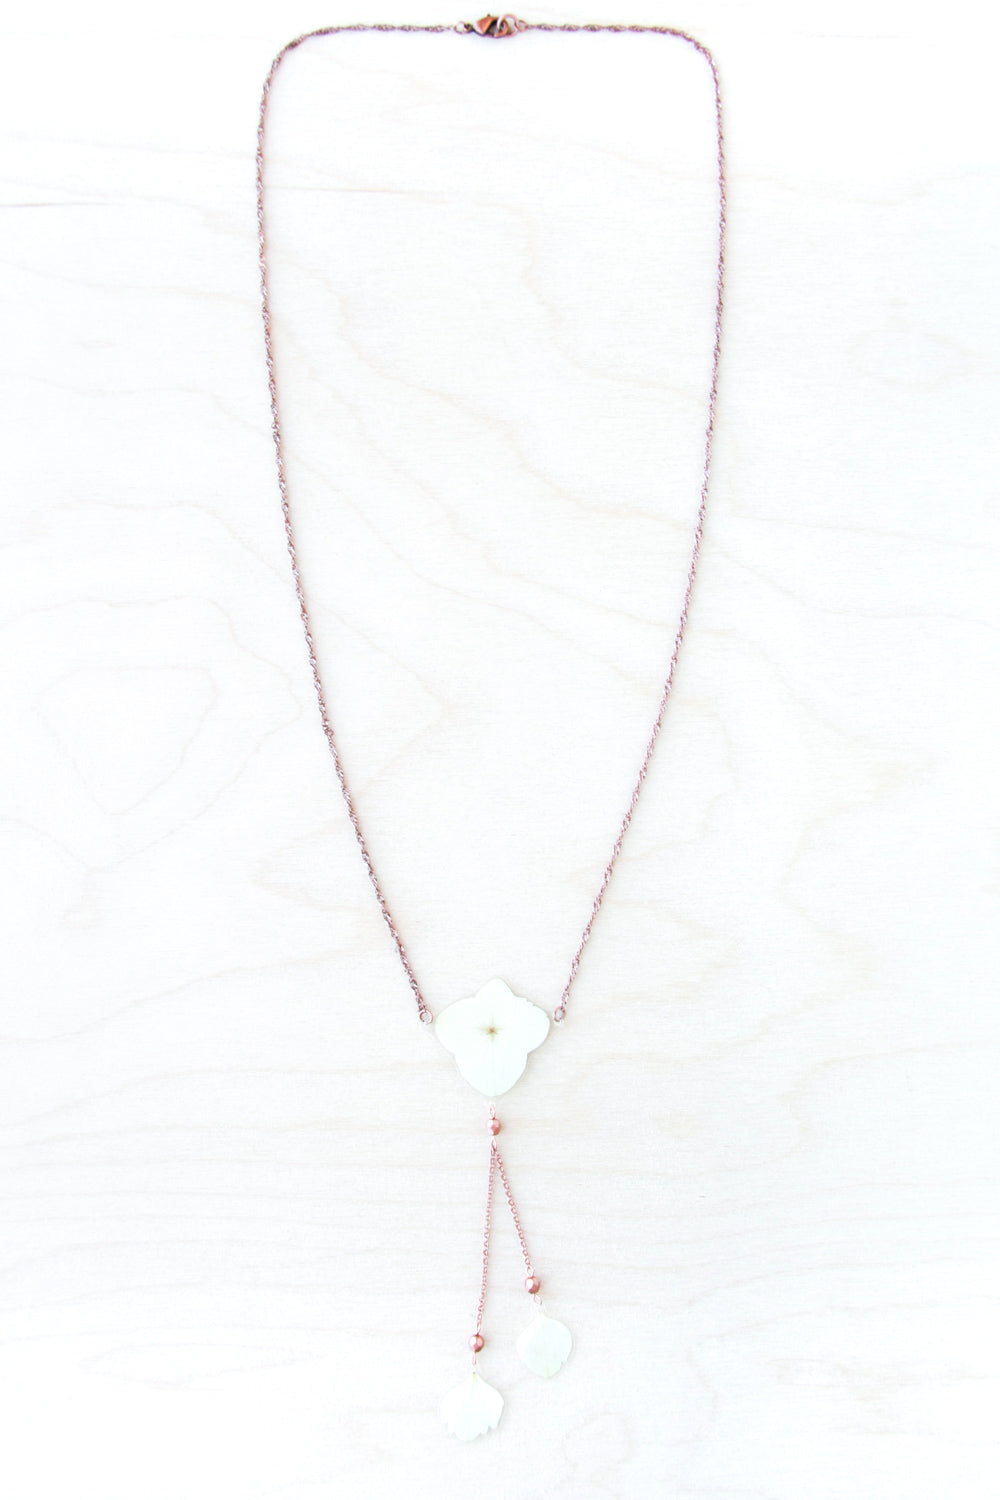 White Hydrangea Flower Lariat Necklace with Copper Beads